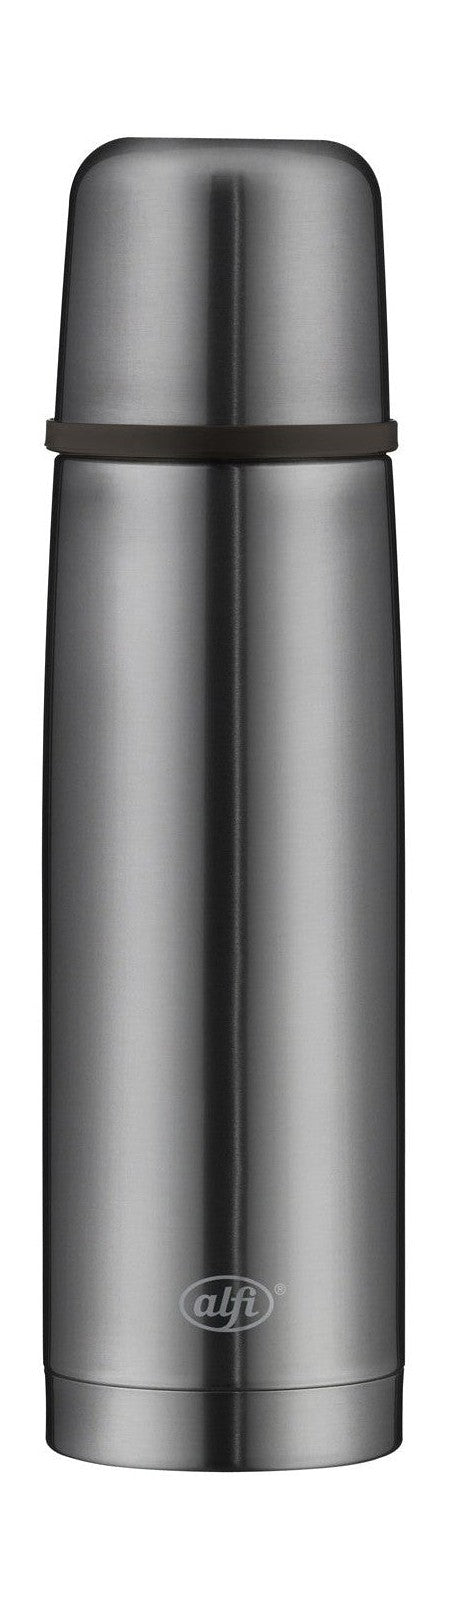 Alfi ISO Therm Perfect Thermo Flasche 0,75 Liter. Matte cool grau